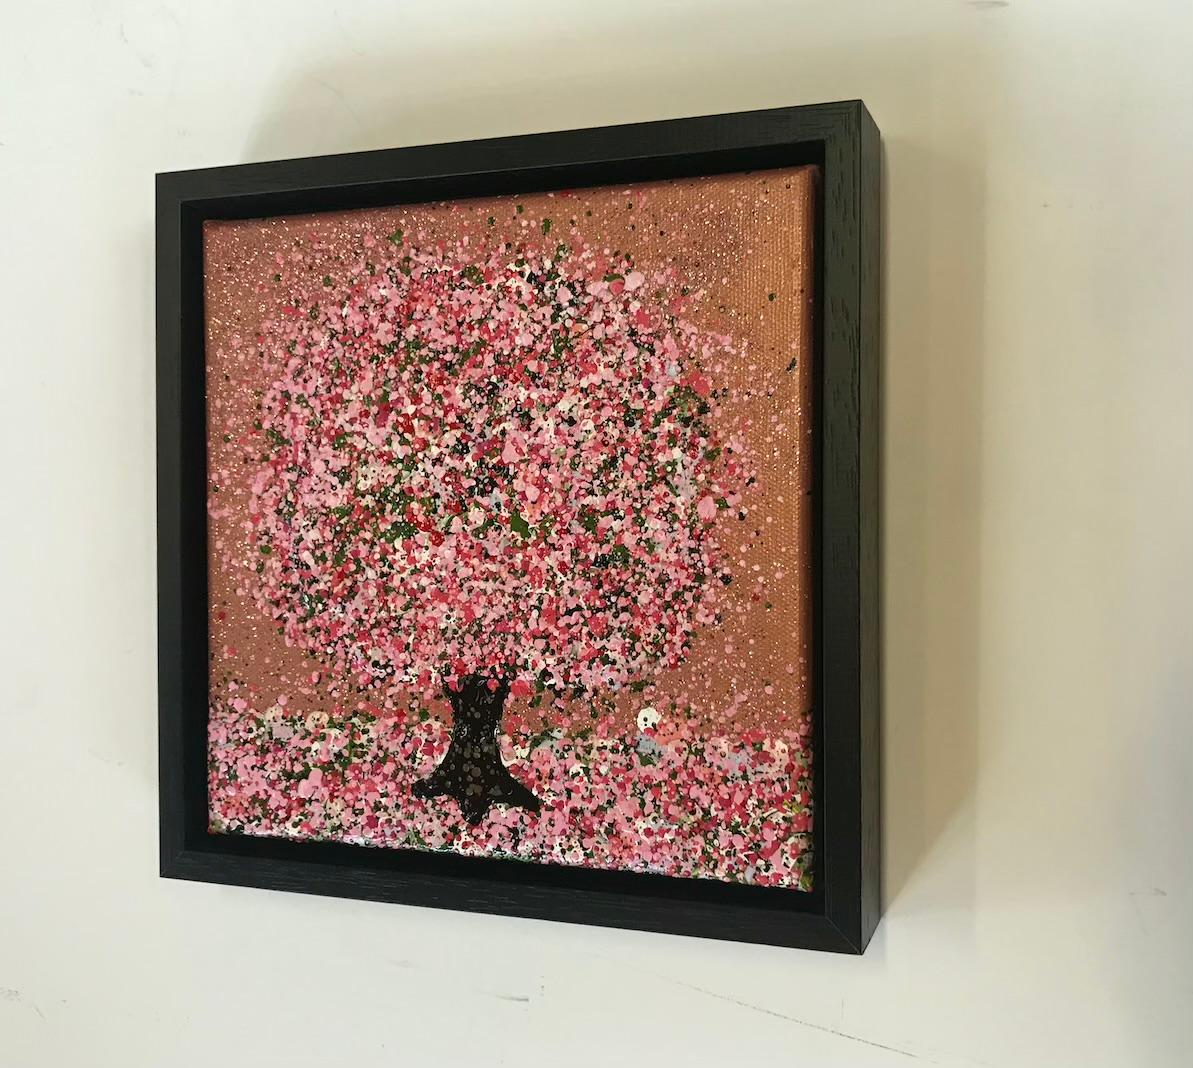 Little Cherry Glitter by Nicky Chubb [2022]
Hand signed by the artist
Acrylic and glitter on Canvas
Image size: H:20 cm x W:20 cm
Frame Size: H:23 cm x W:23 cm x D:3.5cm
Please note that insitu images are purely an indication of how a piece may